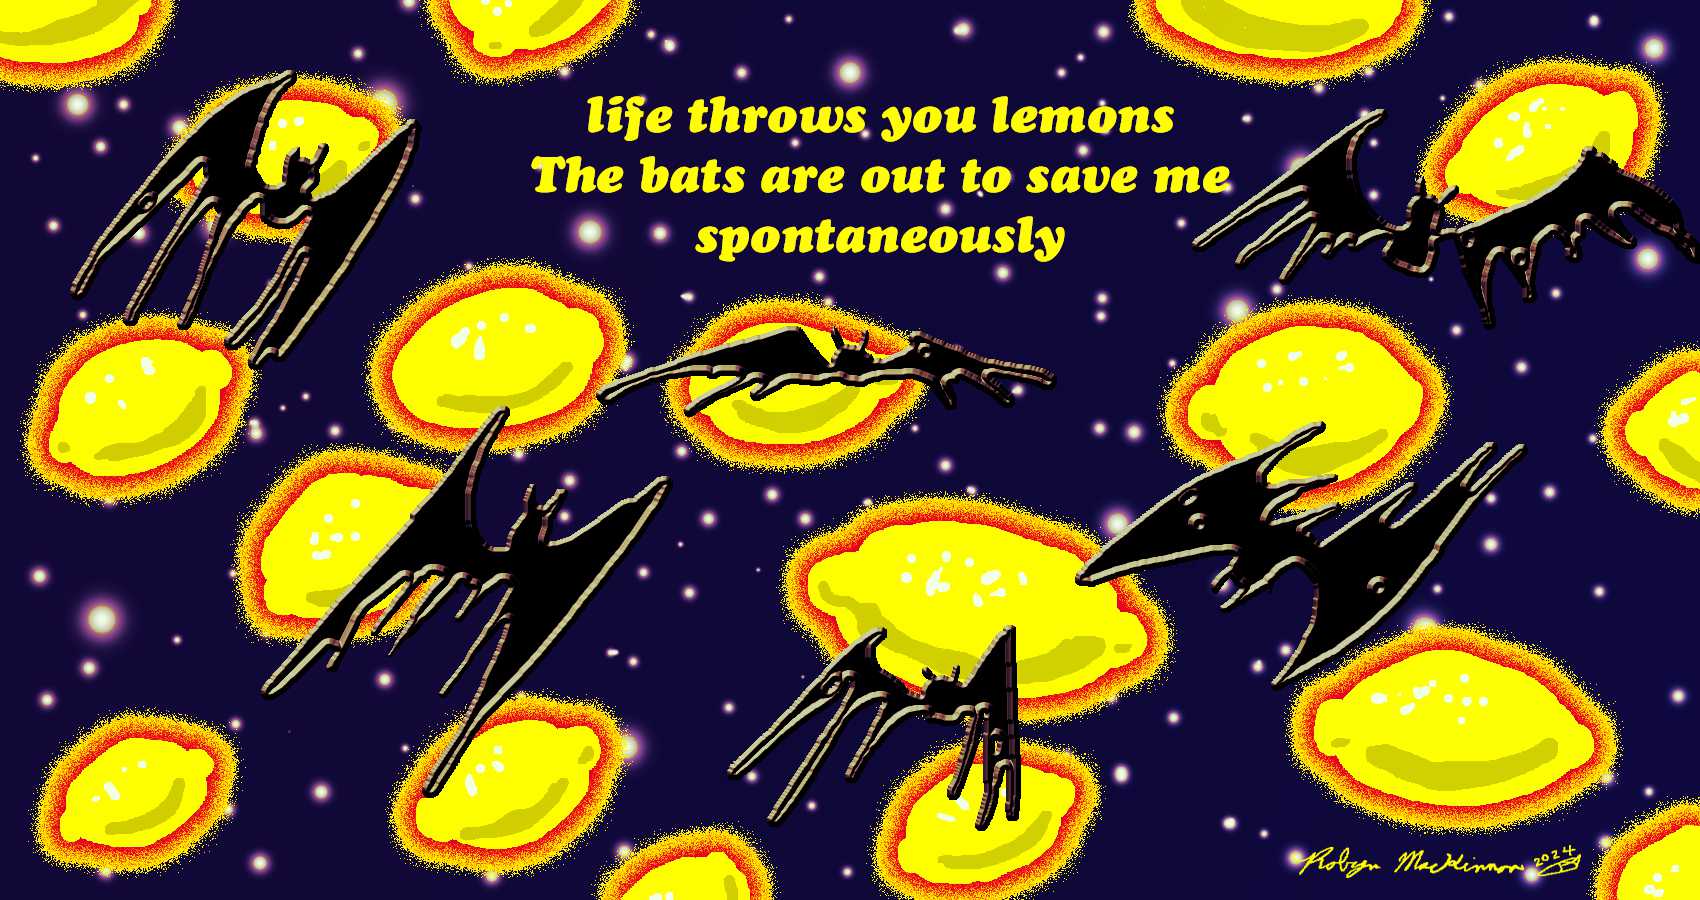 The Lemons and The Bats, haiku by Robyn MacKinnon at Spillwords.com